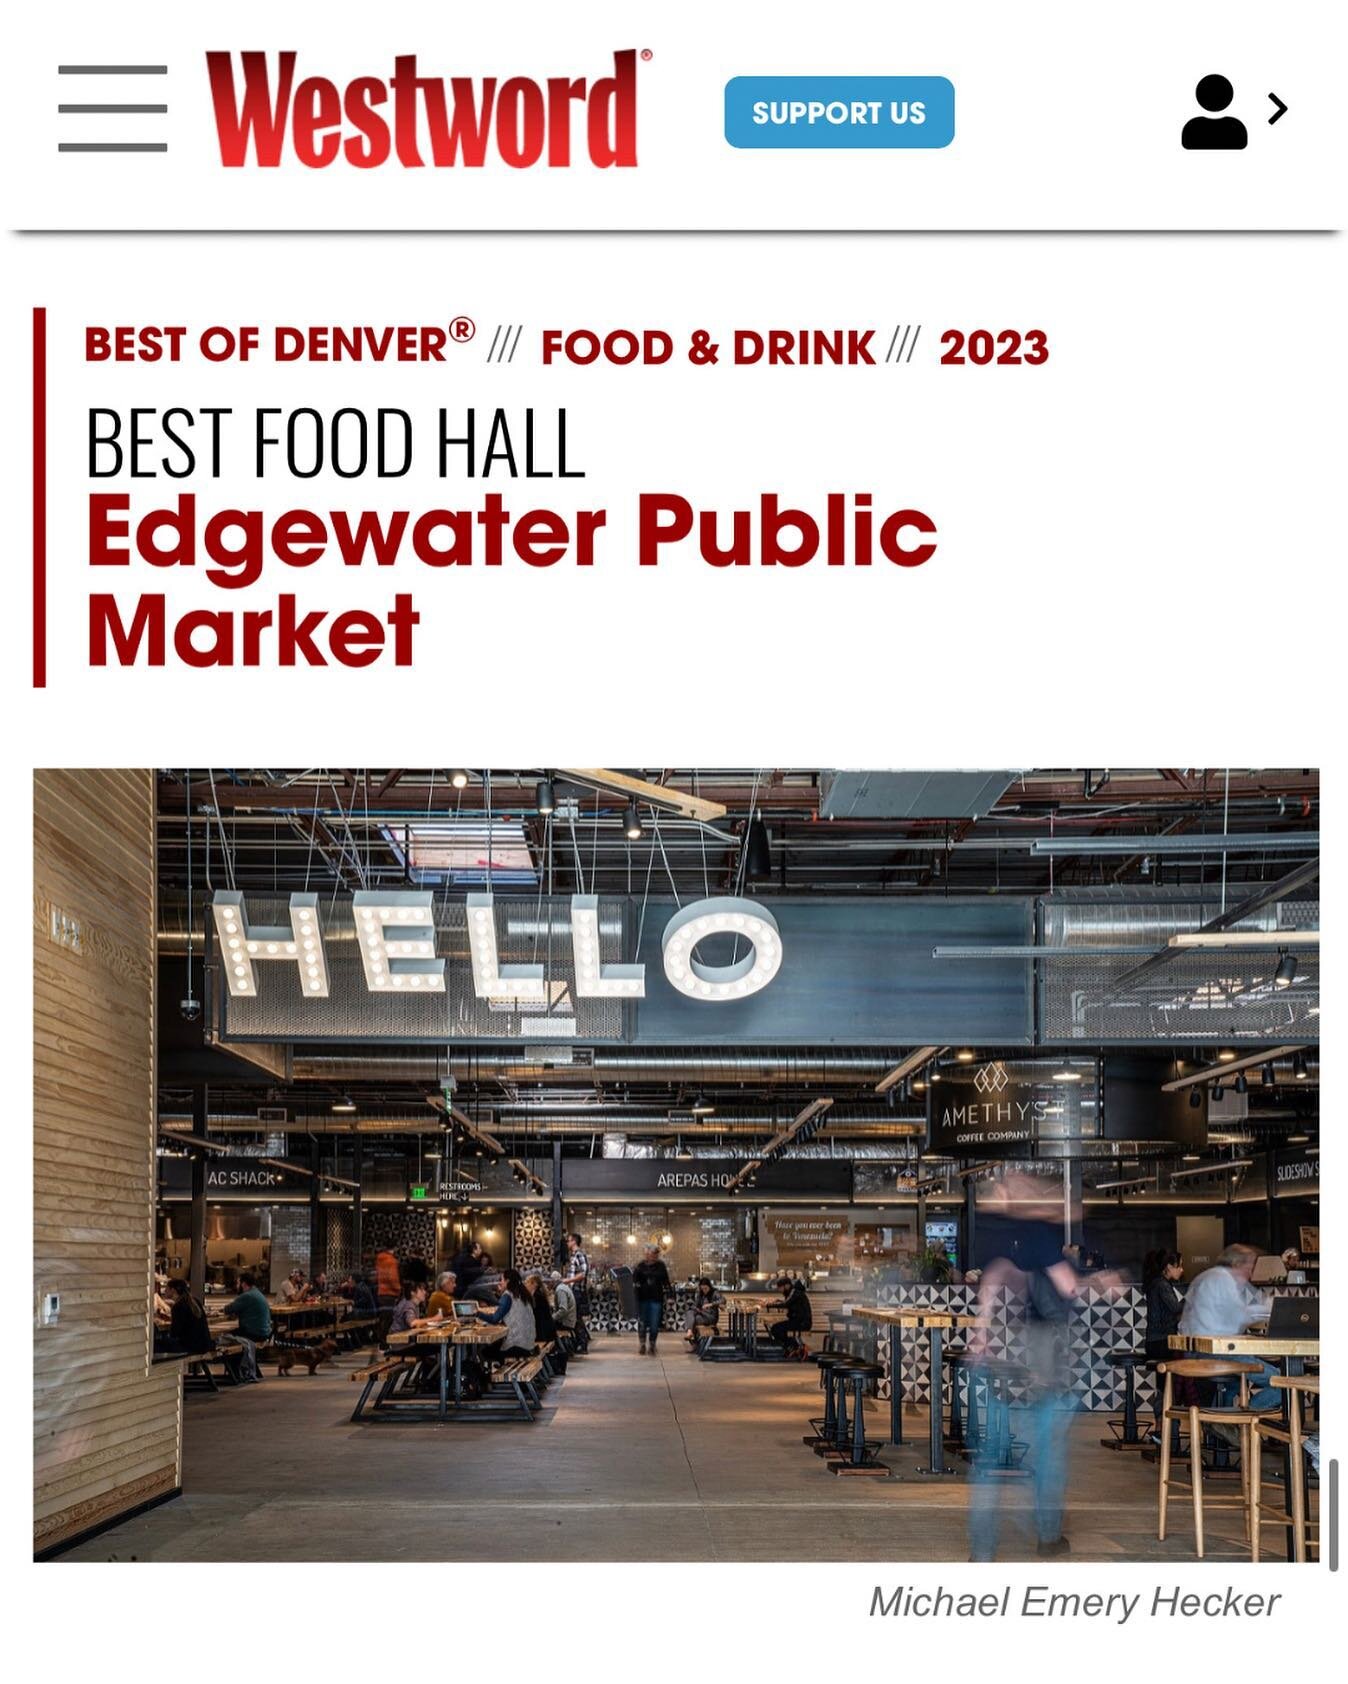 Hot diggity!!! Giant congrats to our besties at @edgewaterpublicmkt for being named BEST FOOD HALL by the wise editors of @denverwestword!

We love working on the team at Edgewater Public Market for 928 reasons. It&rsquo;s a rad collection of mostly 